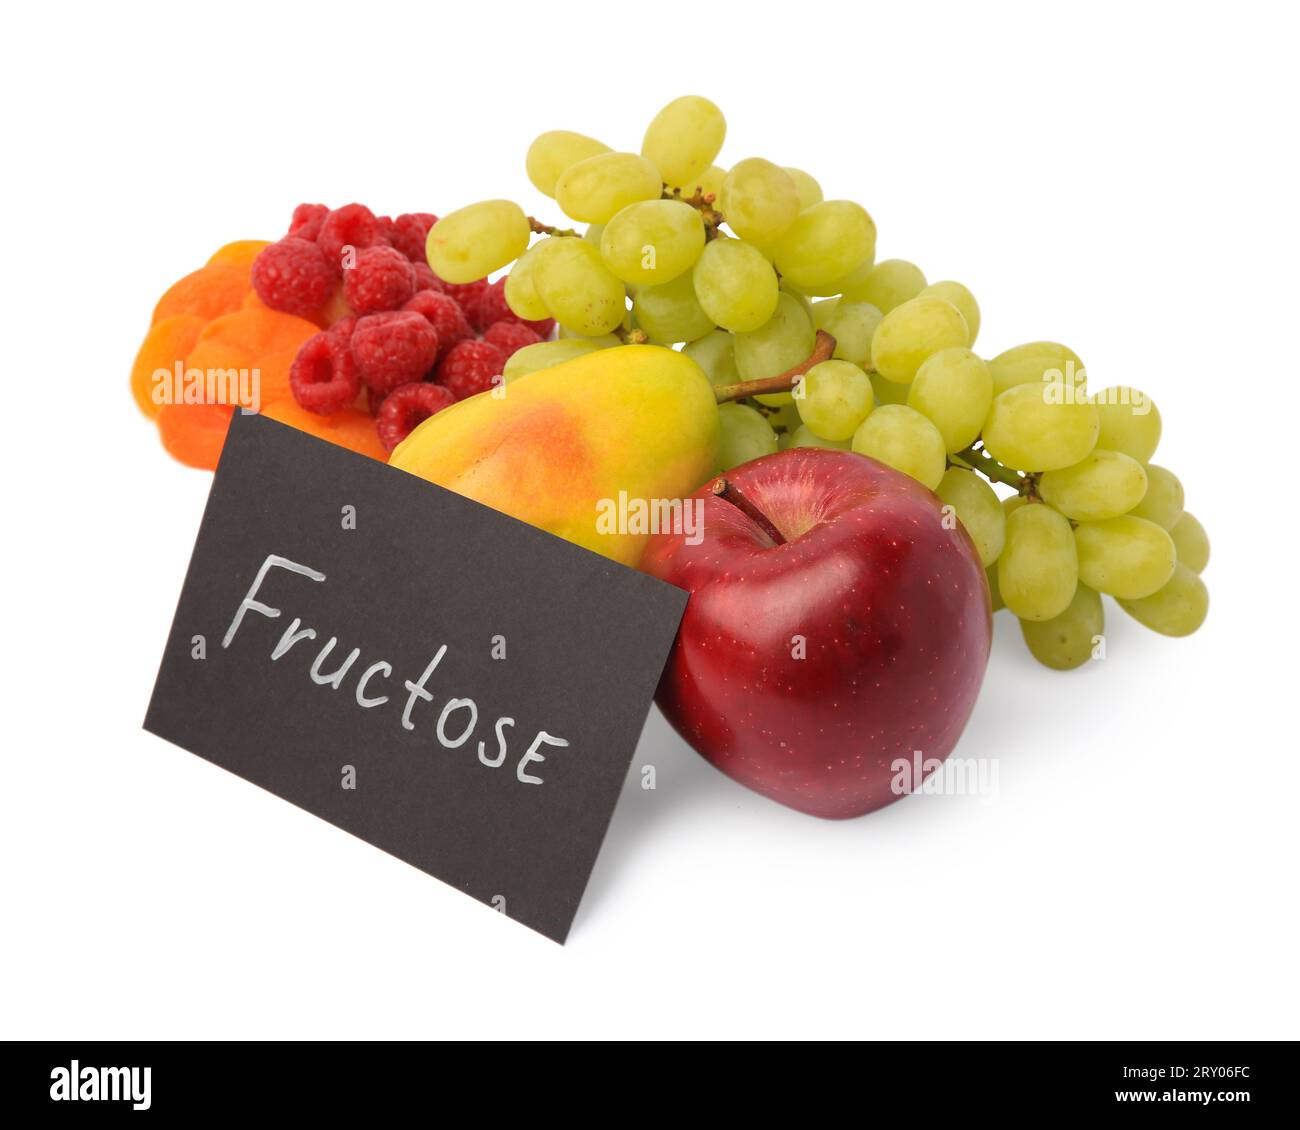 Card with word Fructose, delicious ripe fruits, raspberries and dried apricots isolated on white Stock Photo